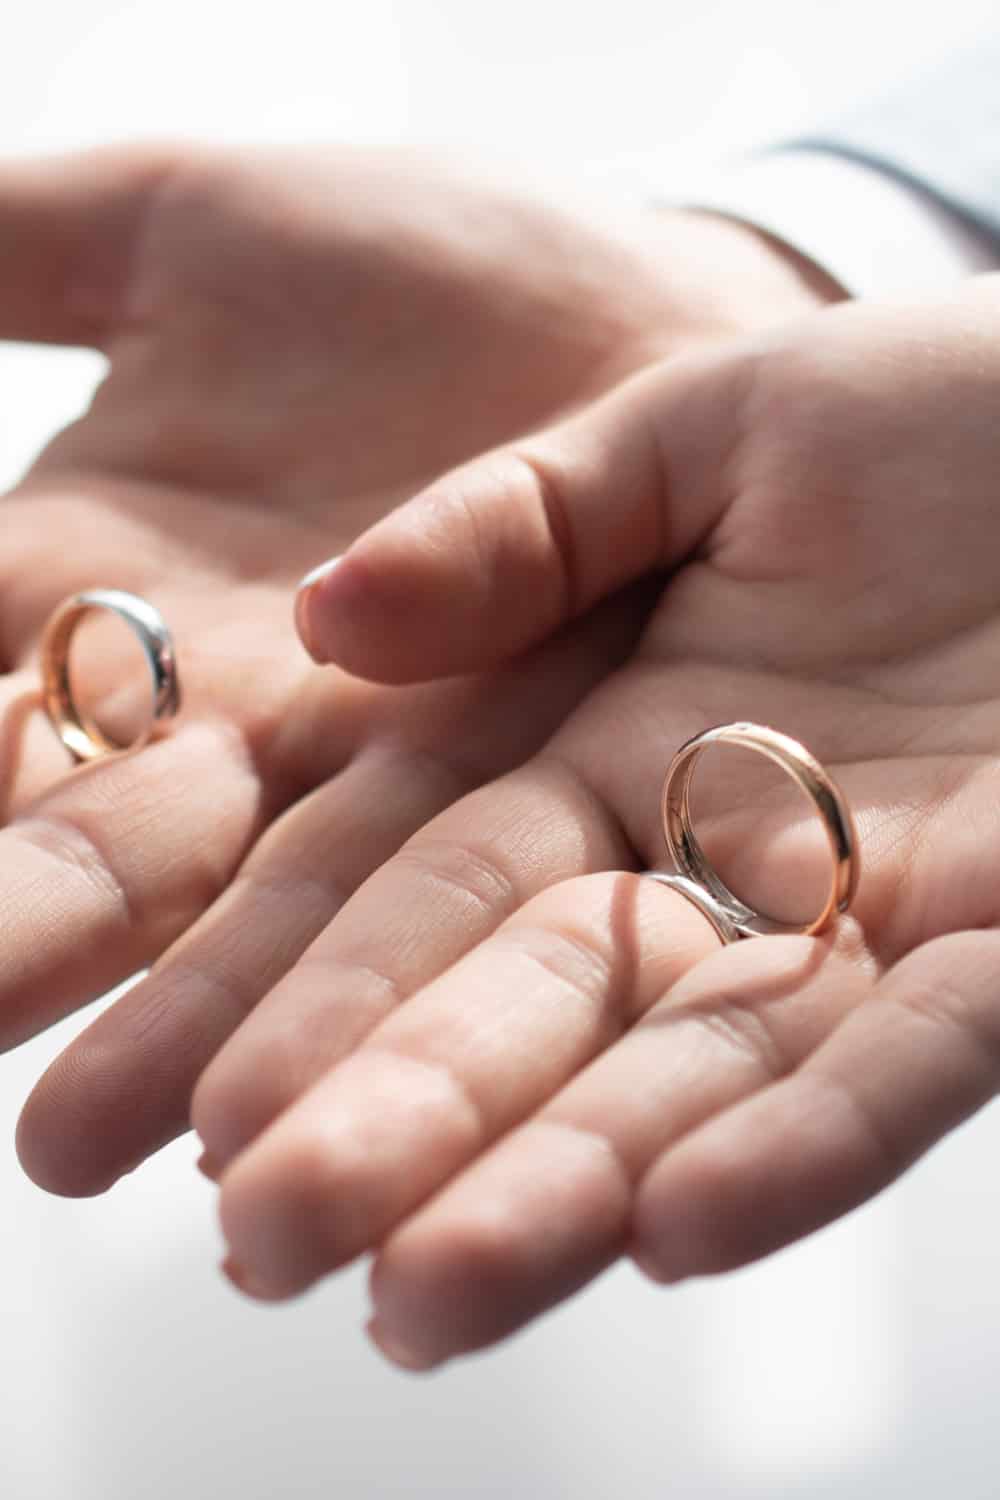 What to say when giving a promise ring